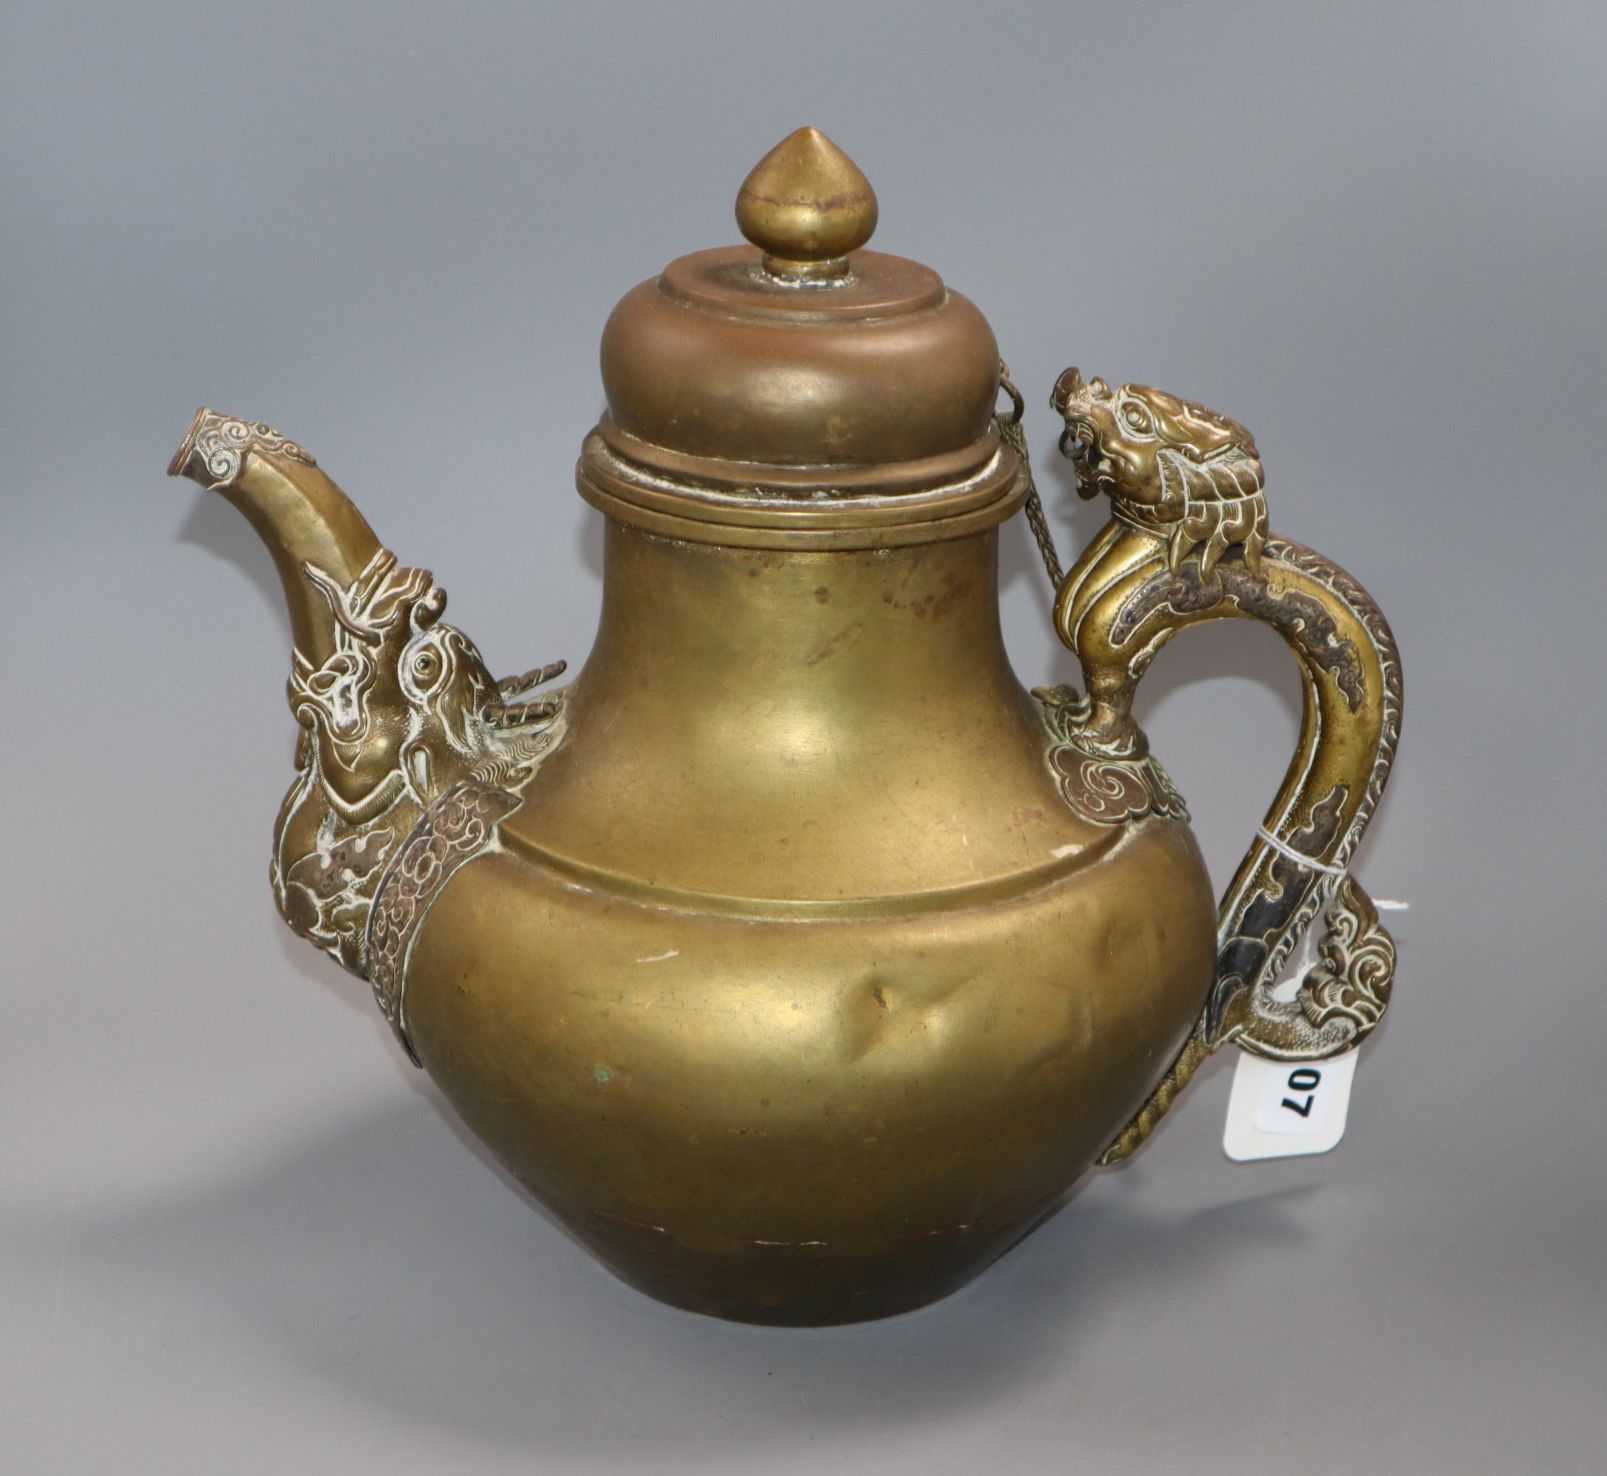 A 19th century Tibetan brass and silver overlaid teapot zoomorphic spout and dragon handle, H. - Image 2 of 2